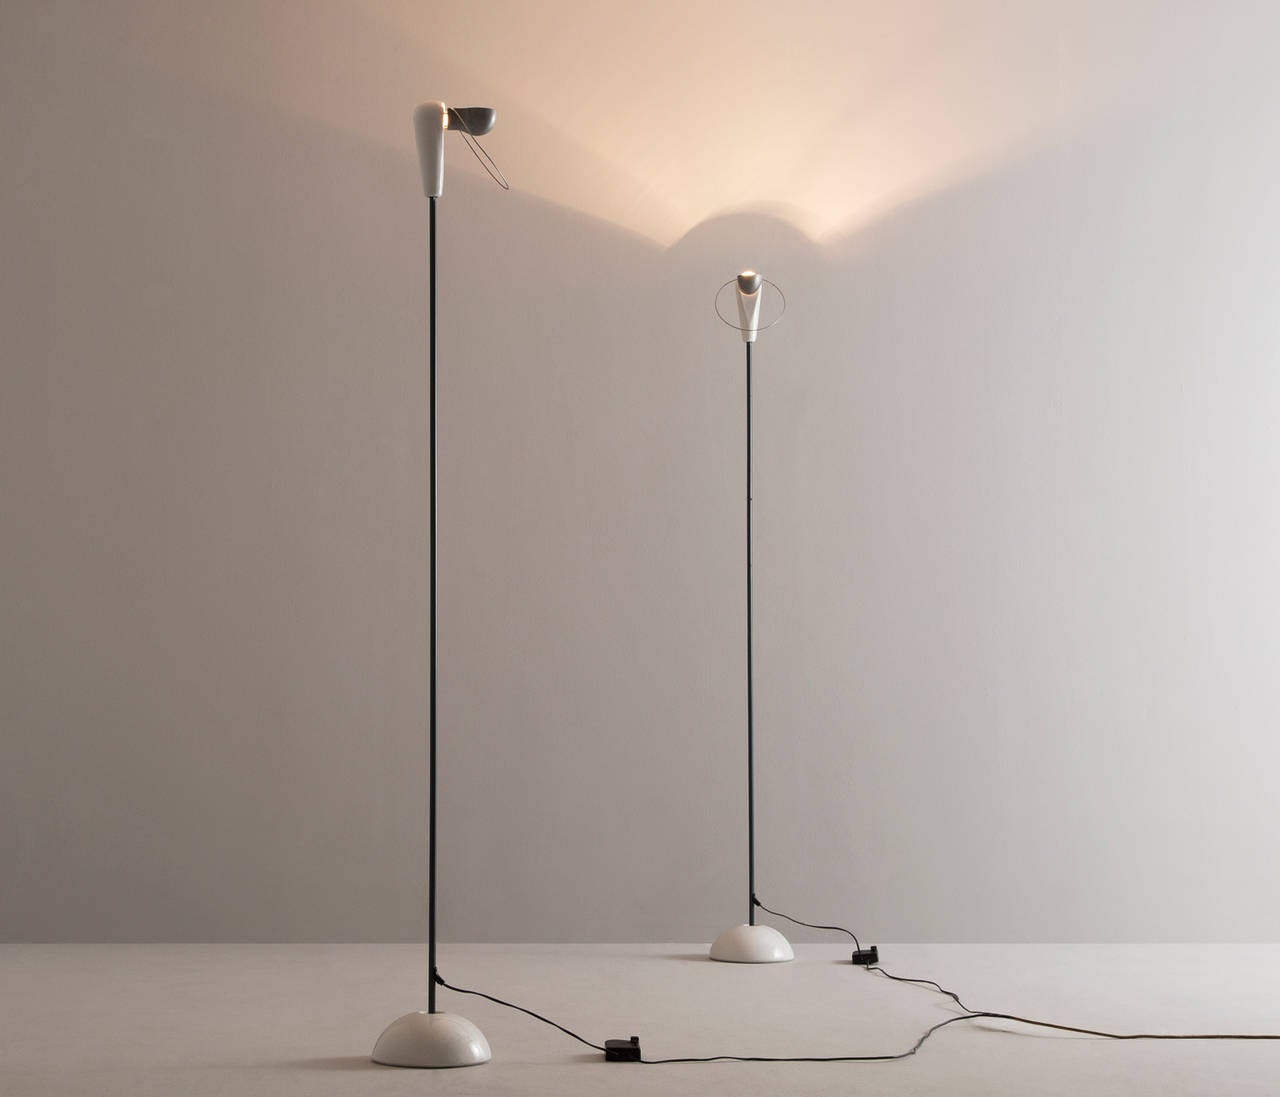 Matching set of 2 'Bi-Bip' Floor Lamps designed by Achille Castiglioni manufactured by Flos, Italy.
 
These floor lamps have a very elegant and subtle design. The slim stem support an ceramic head. A round designed steel screen can be rotated